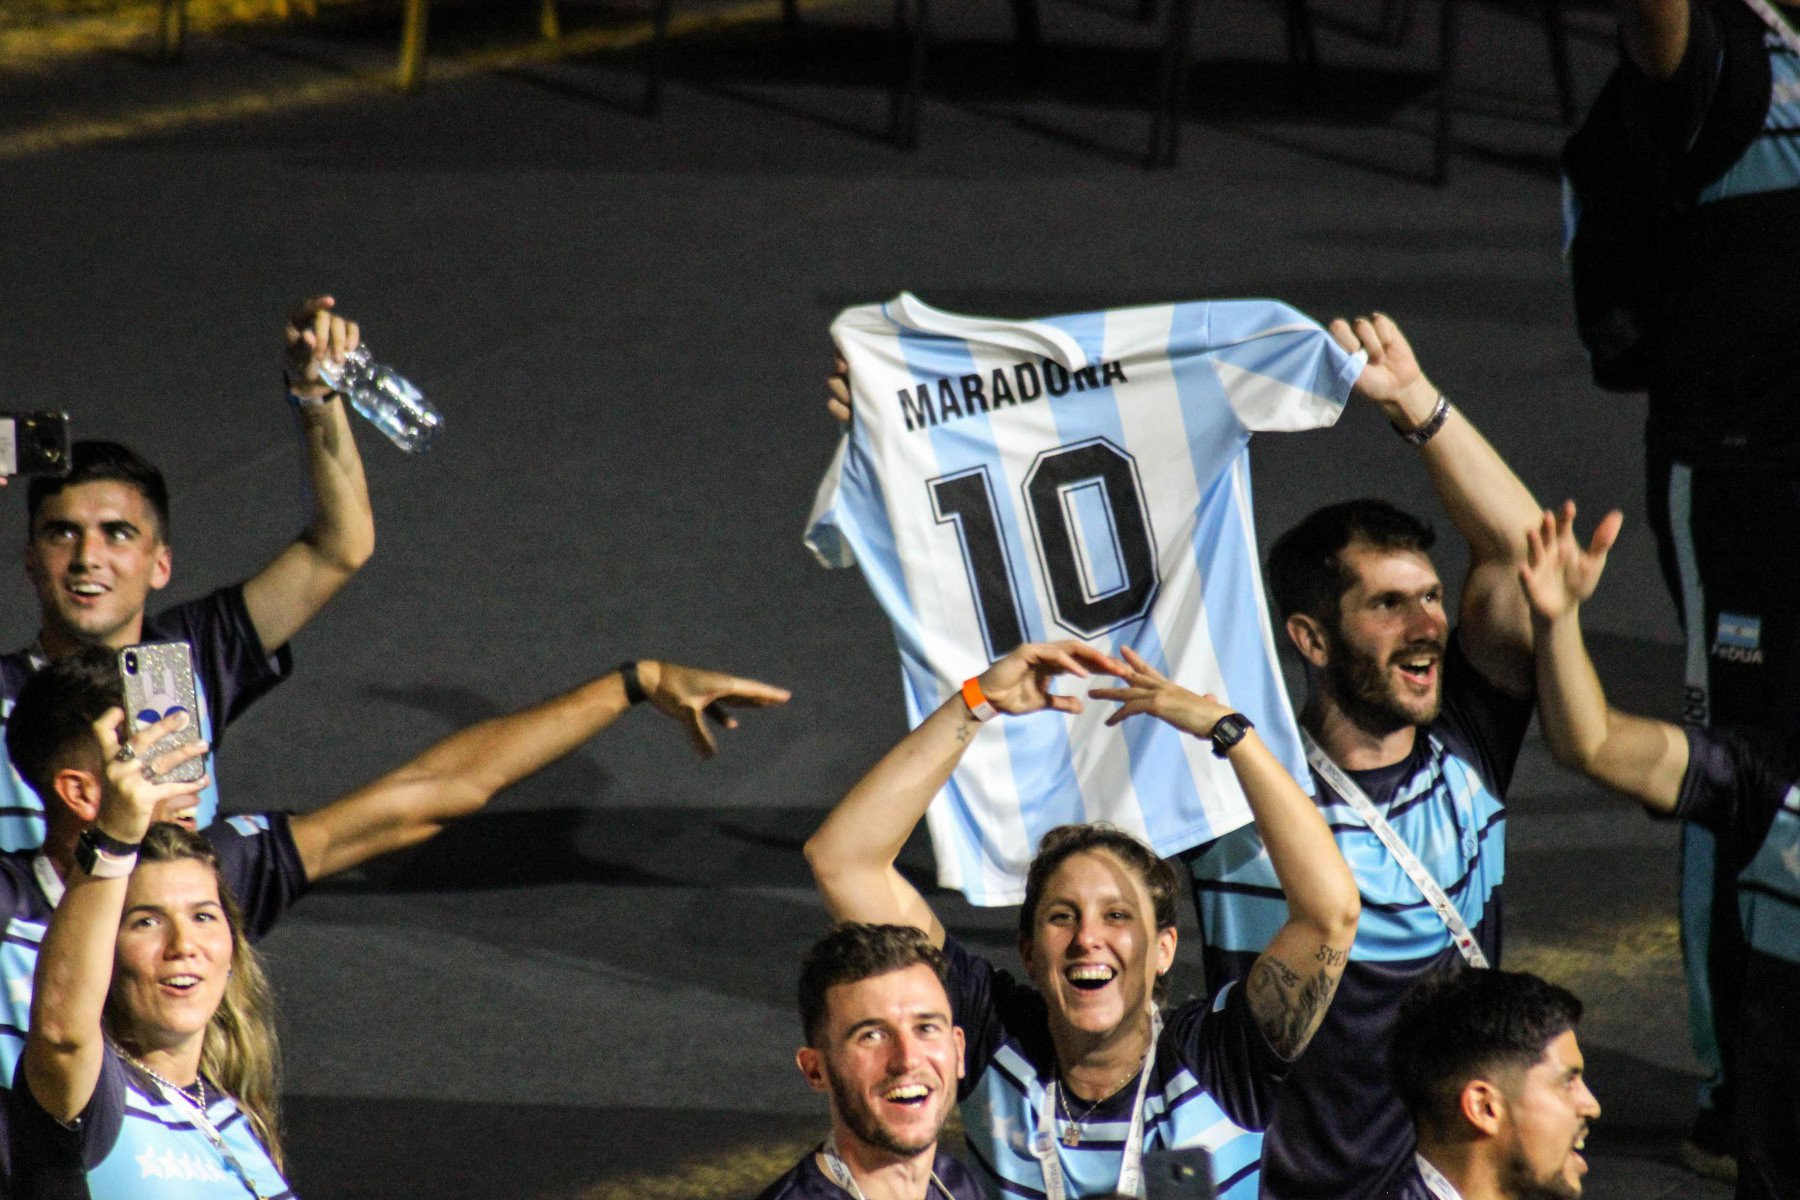 The Argentinian team held aloft a Diego Maradona shirt when they entered the San Paolo Stadium during the Naples 2019 Opening Ceremony ©Naples 2019